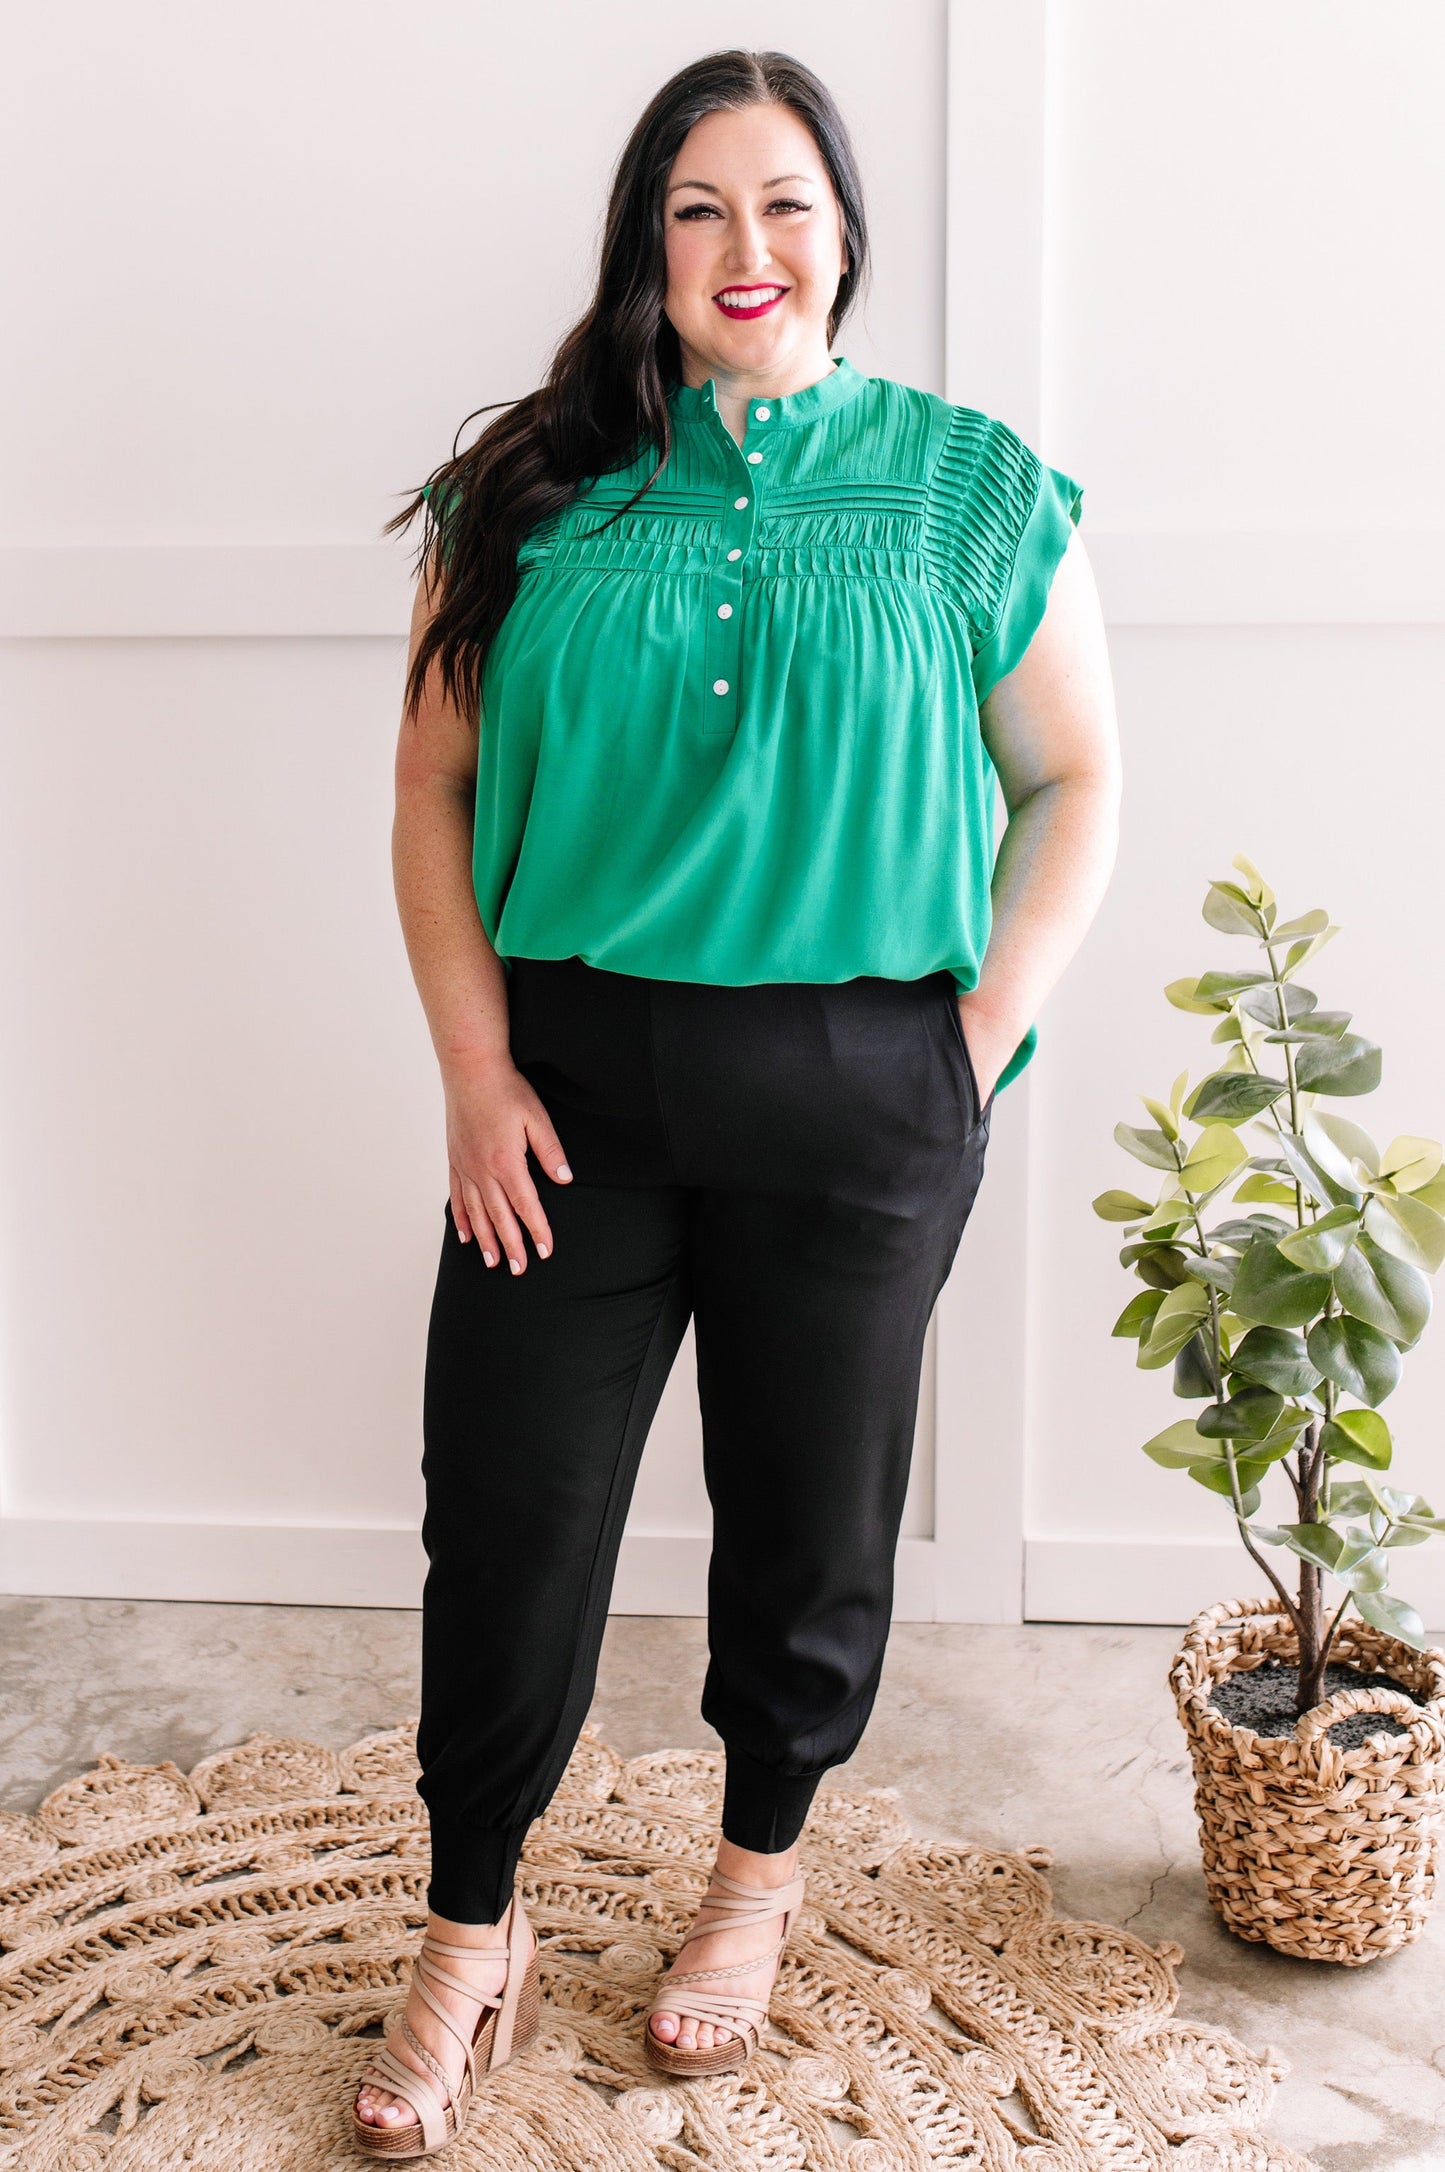 3.6 Button Front Pleated Blouse In Spring Green